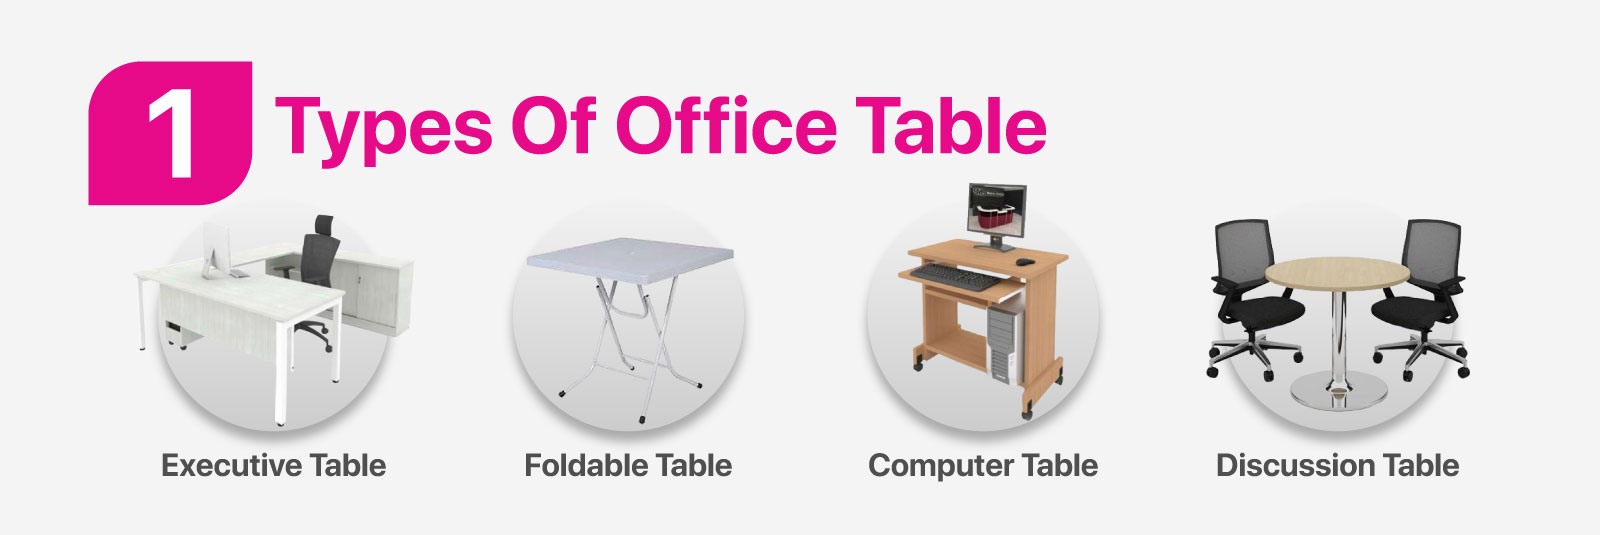 Types Of Office Table - Executive Table, Foldable Table, Computer Table, Discussion Table